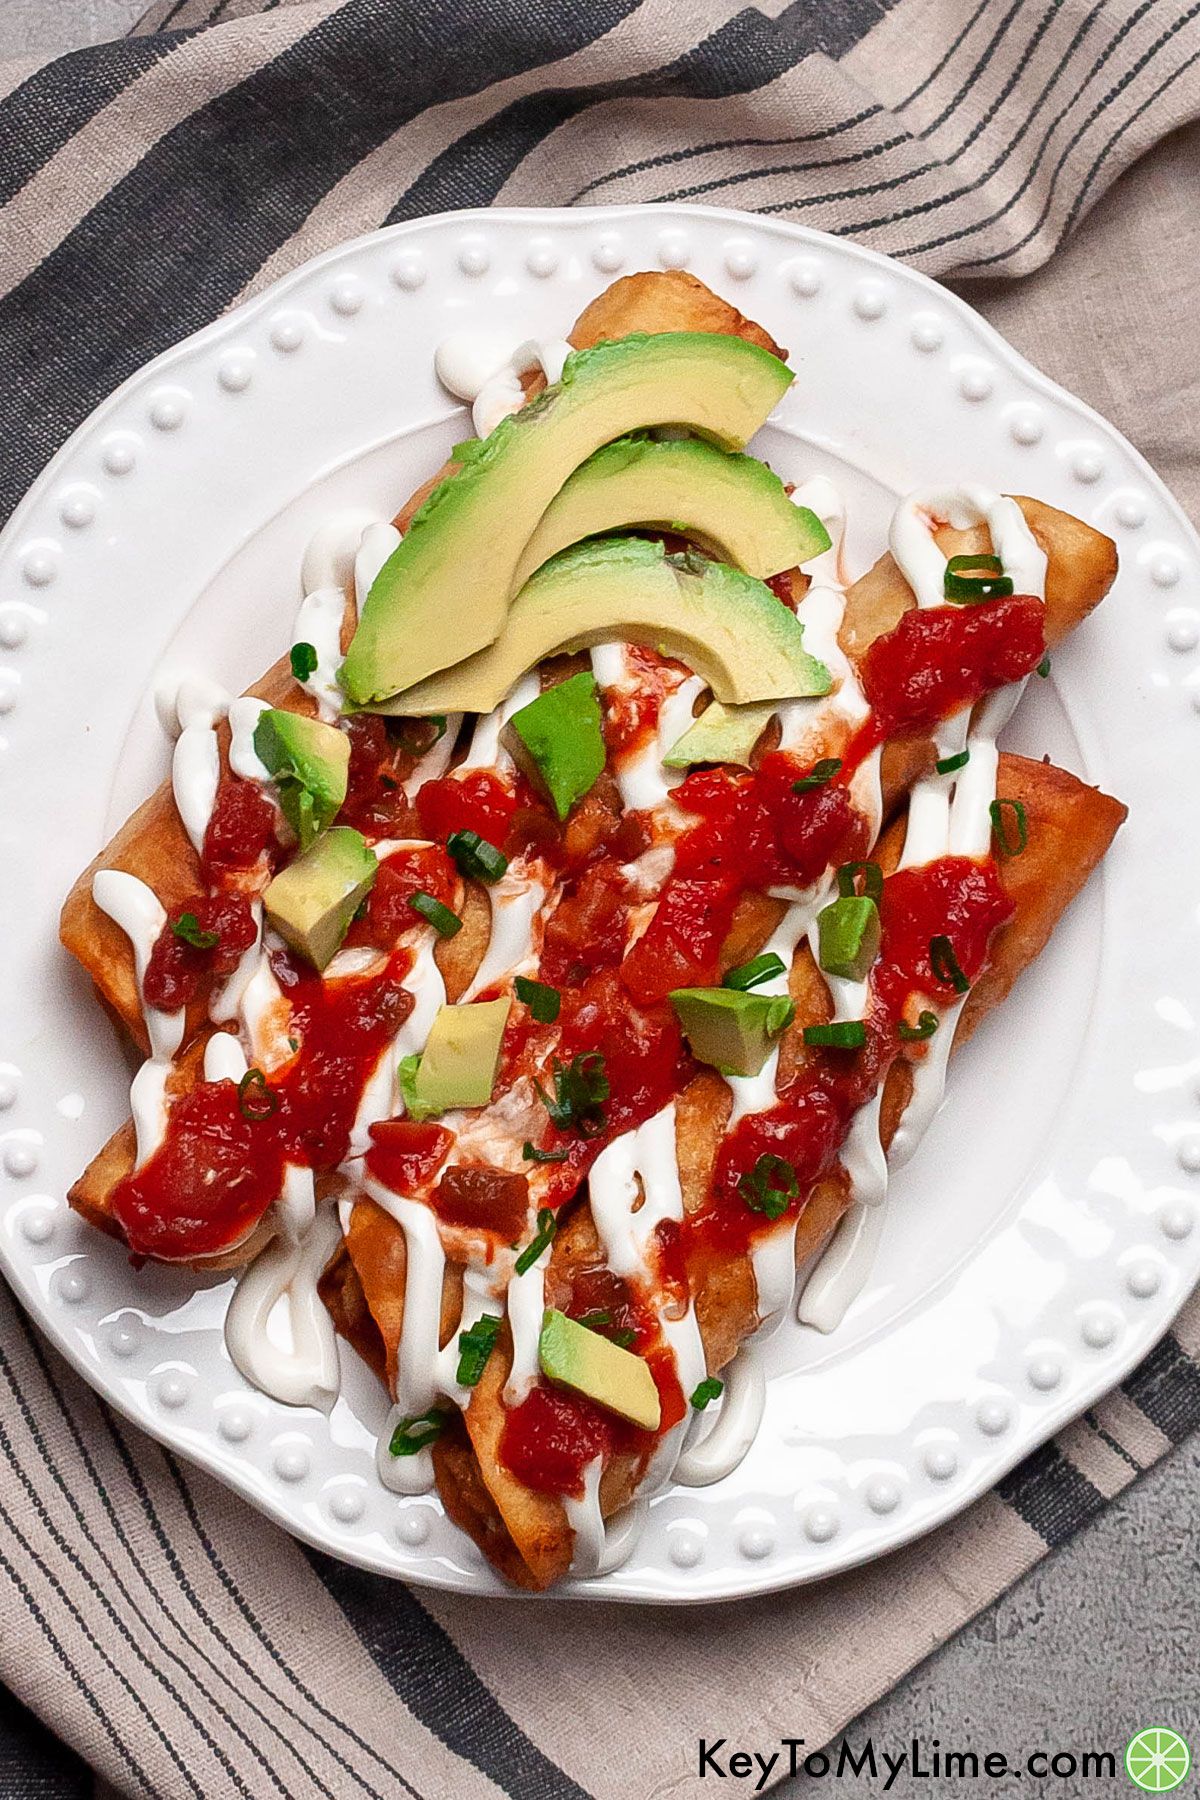 Chicken flautas topped with salsa, sour cream, and avocado.